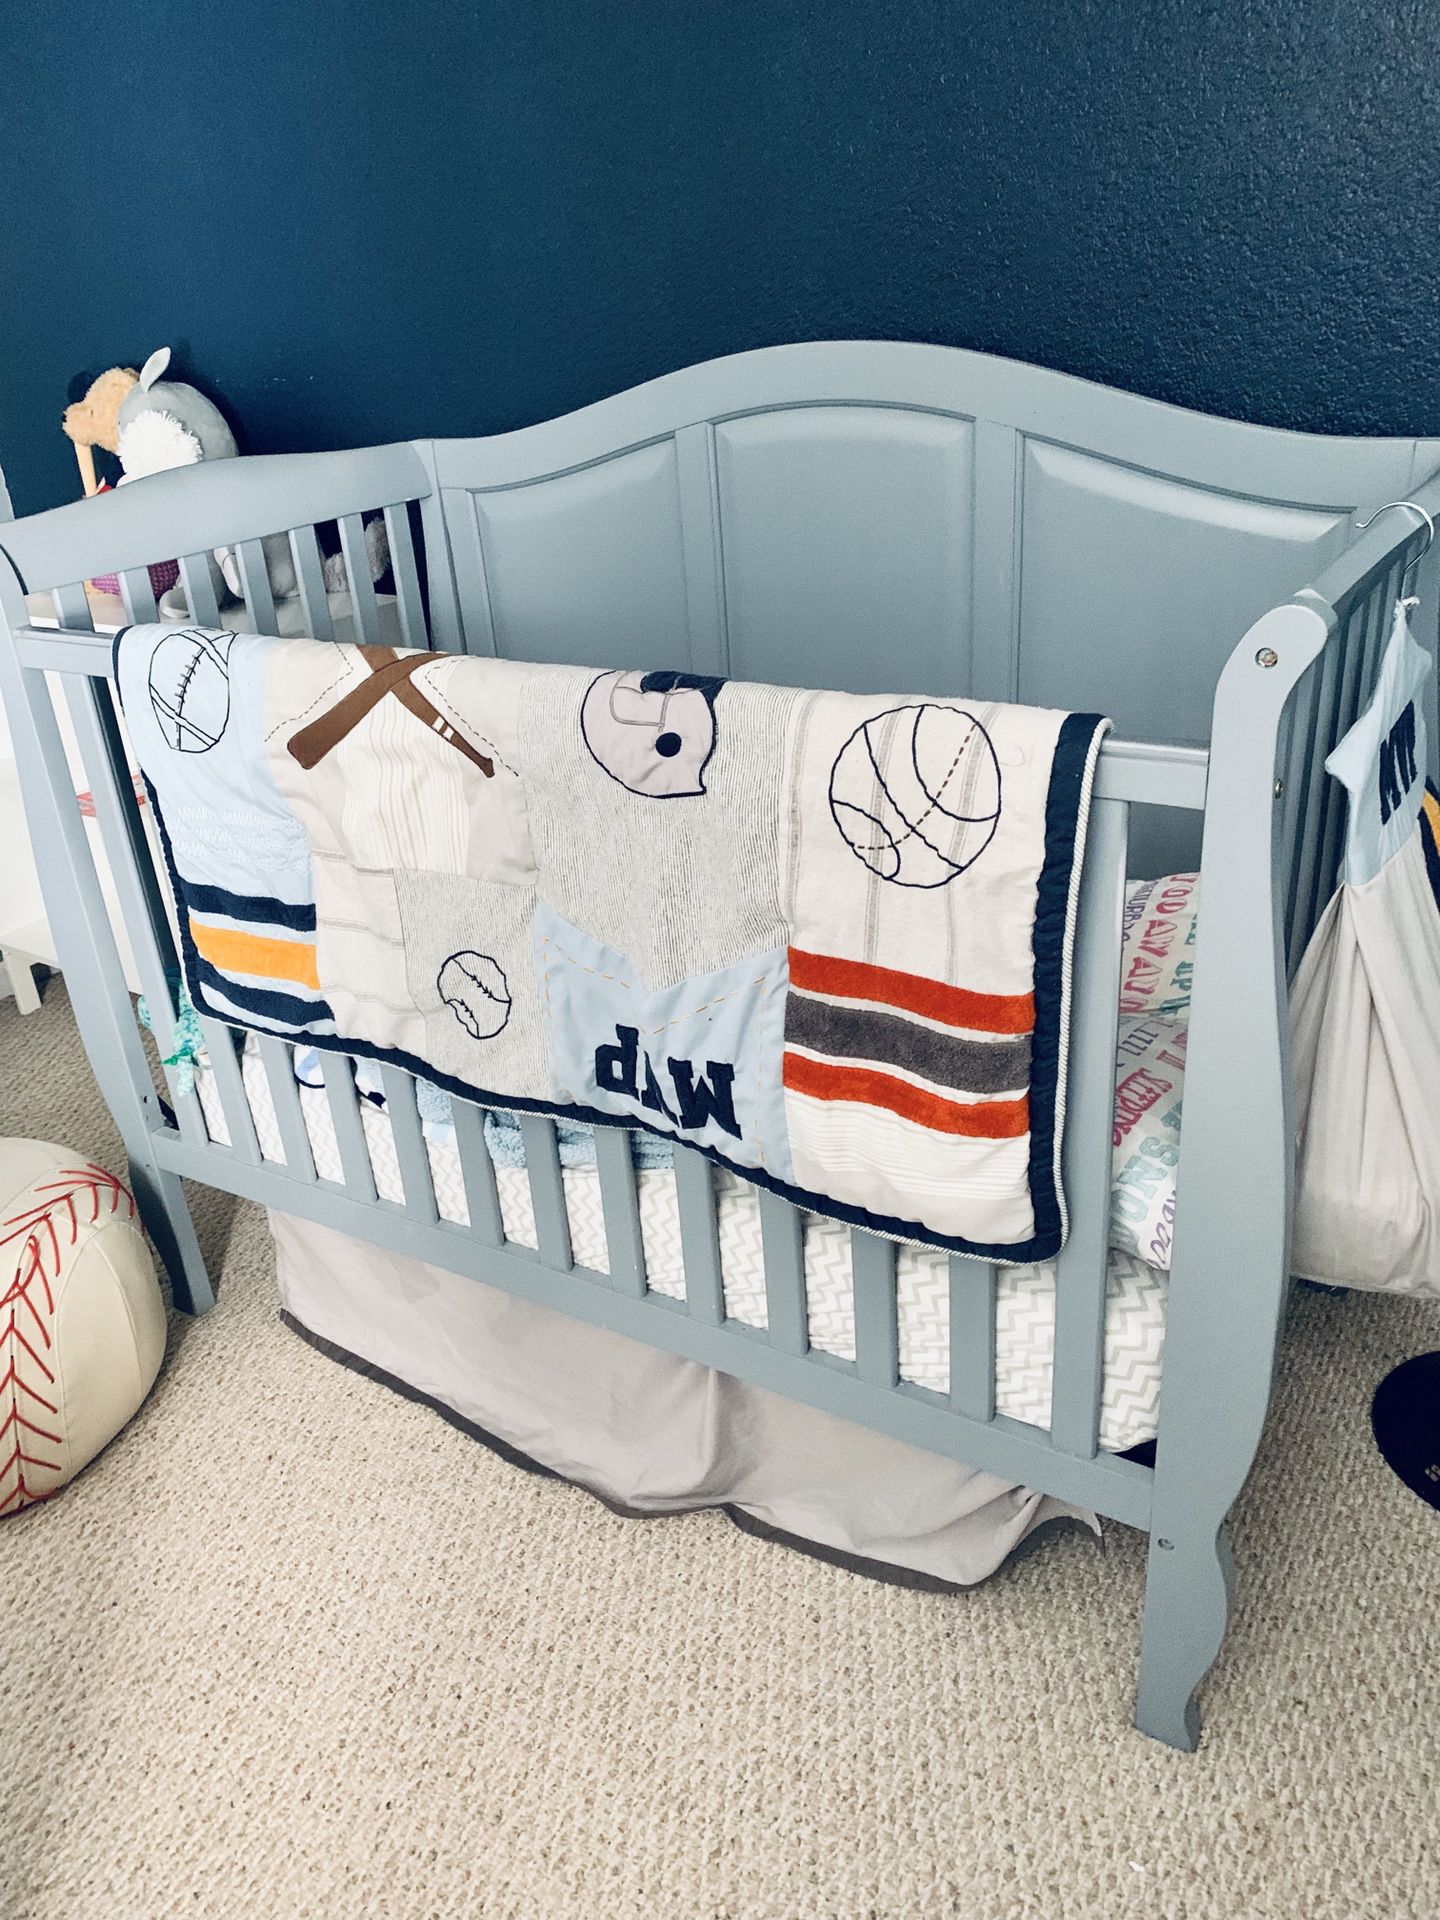 Crib and baby furniture